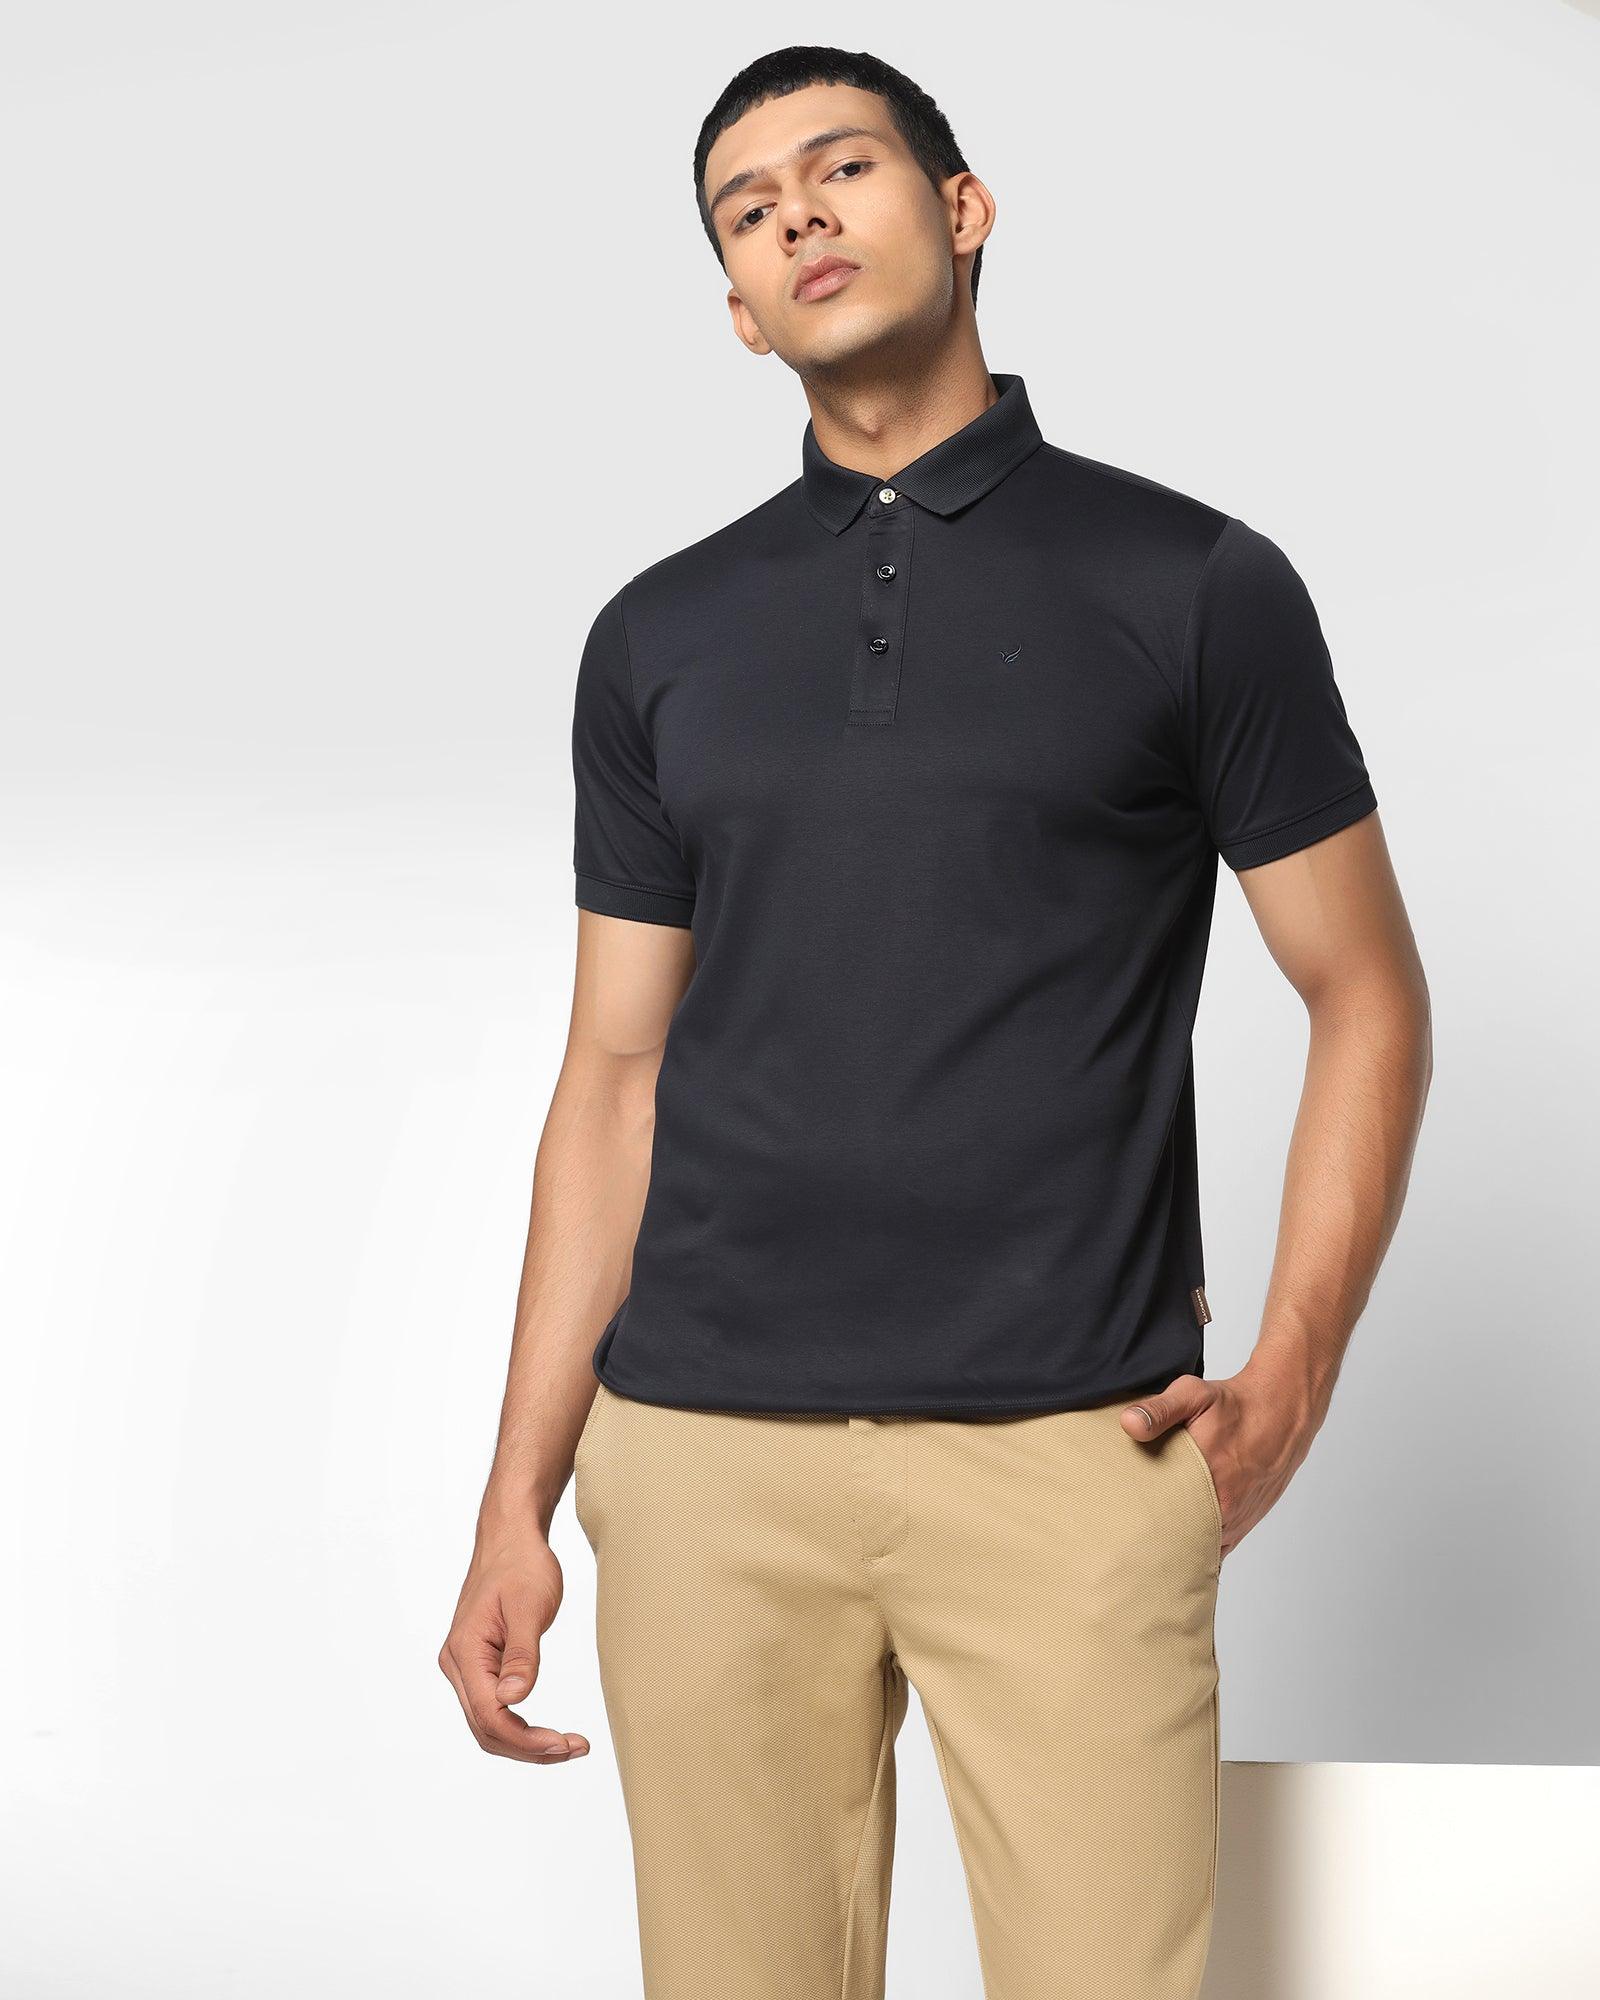 Polo Navy Solid T-Shirt - Toll